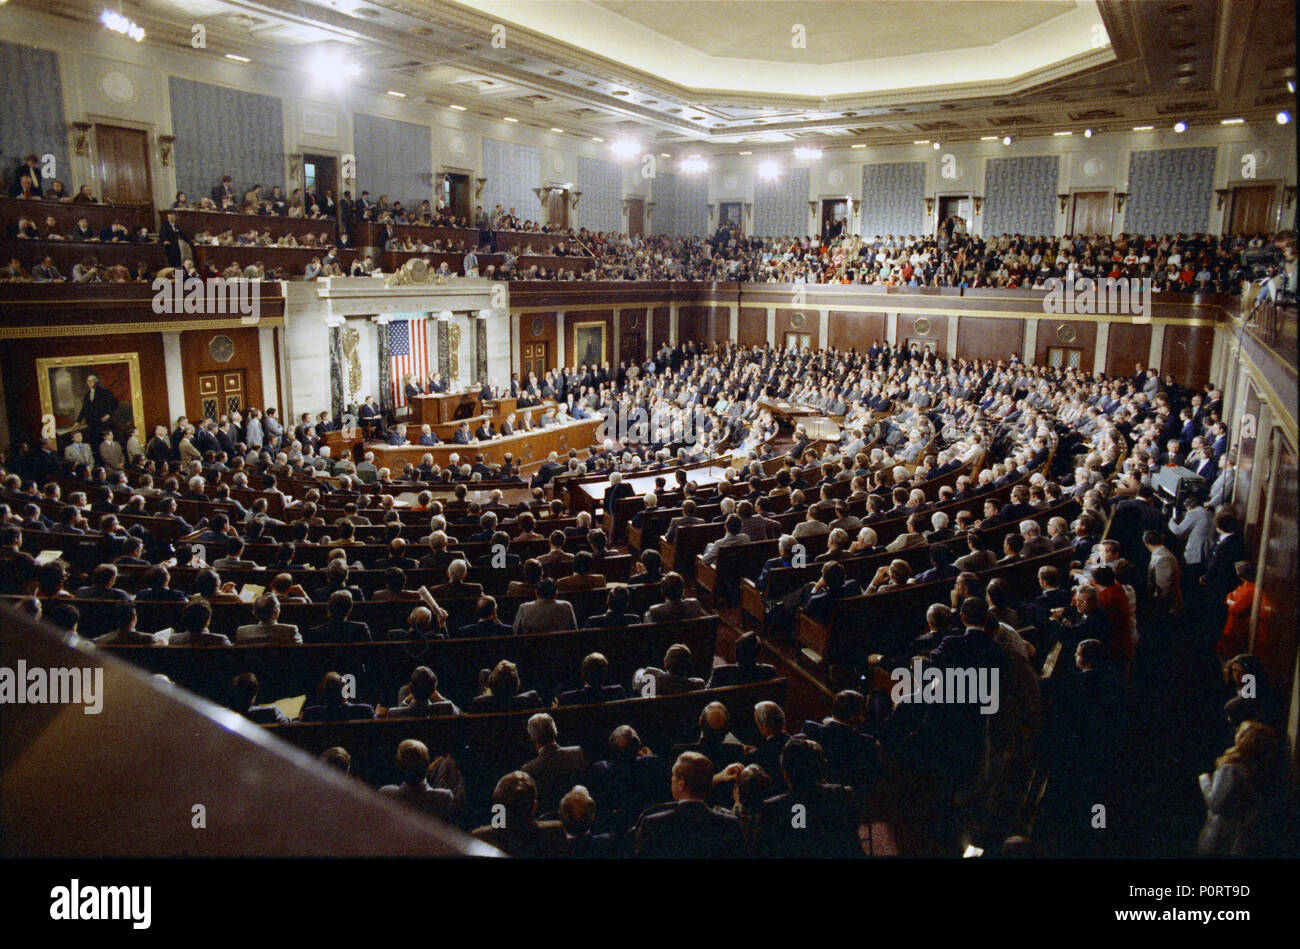 1975, January 15 – United States Capitol - House Chamber – Gerald R. Ford, Rockefeller, Rep. Albert, Clerks, Congressmen & Women, Others – GRF speaking at podium, gesturing; others seated, listening - long shot taken from Gallery – State of the Union Address Stock Photo